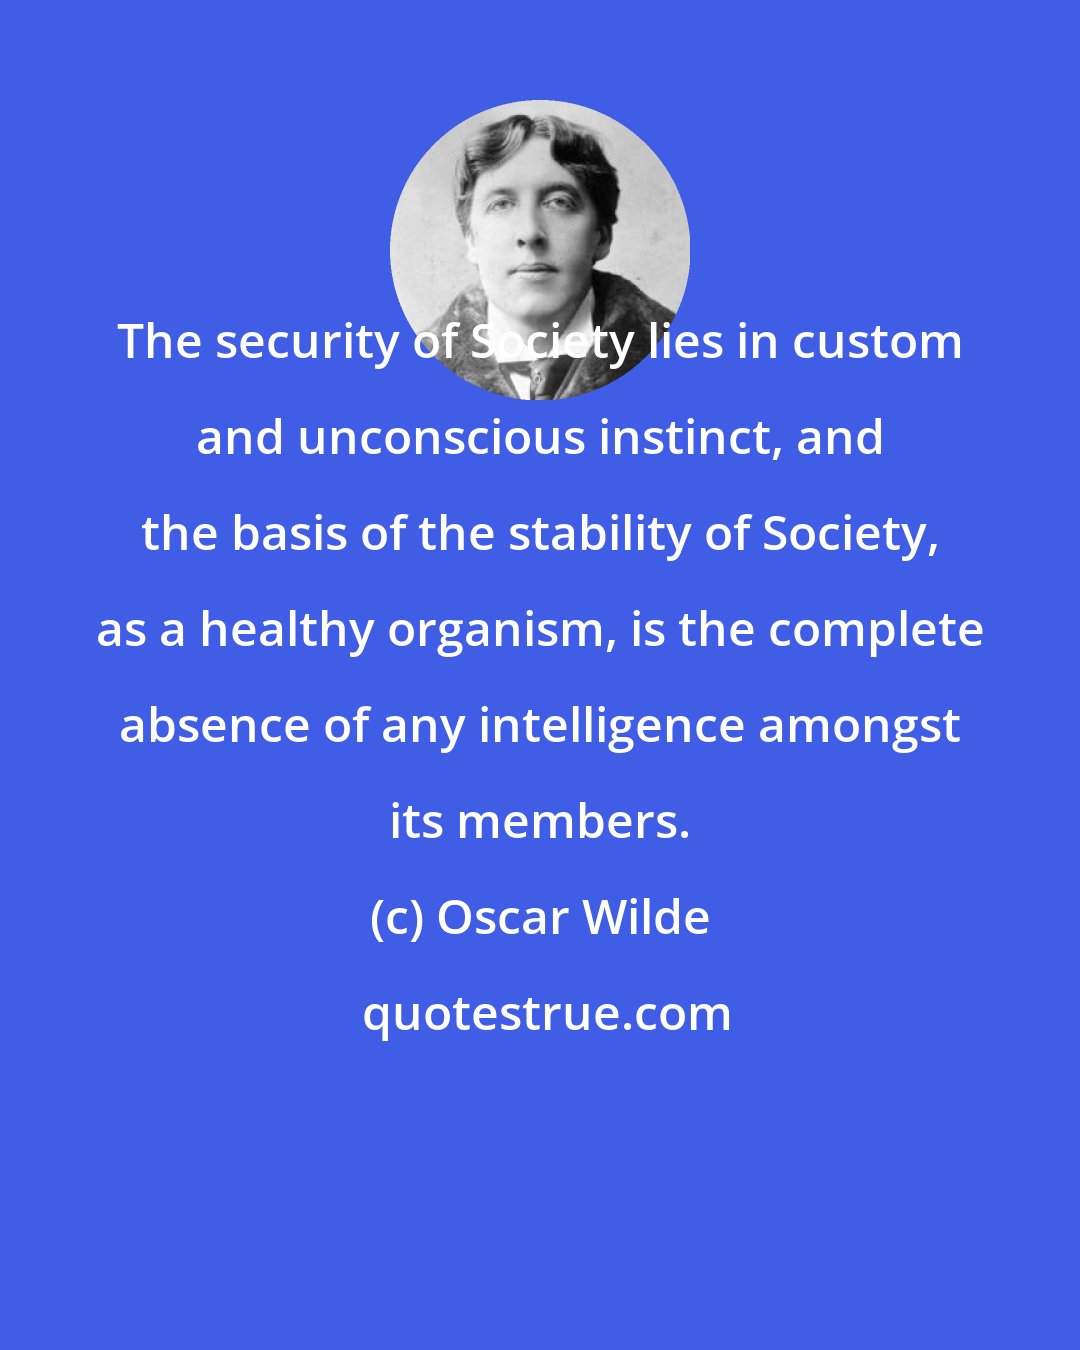 Oscar Wilde: The security of Society lies in custom and unconscious instinct, and the basis of the stability of Society, as a healthy organism, is the complete absence of any intelligence amongst its members.